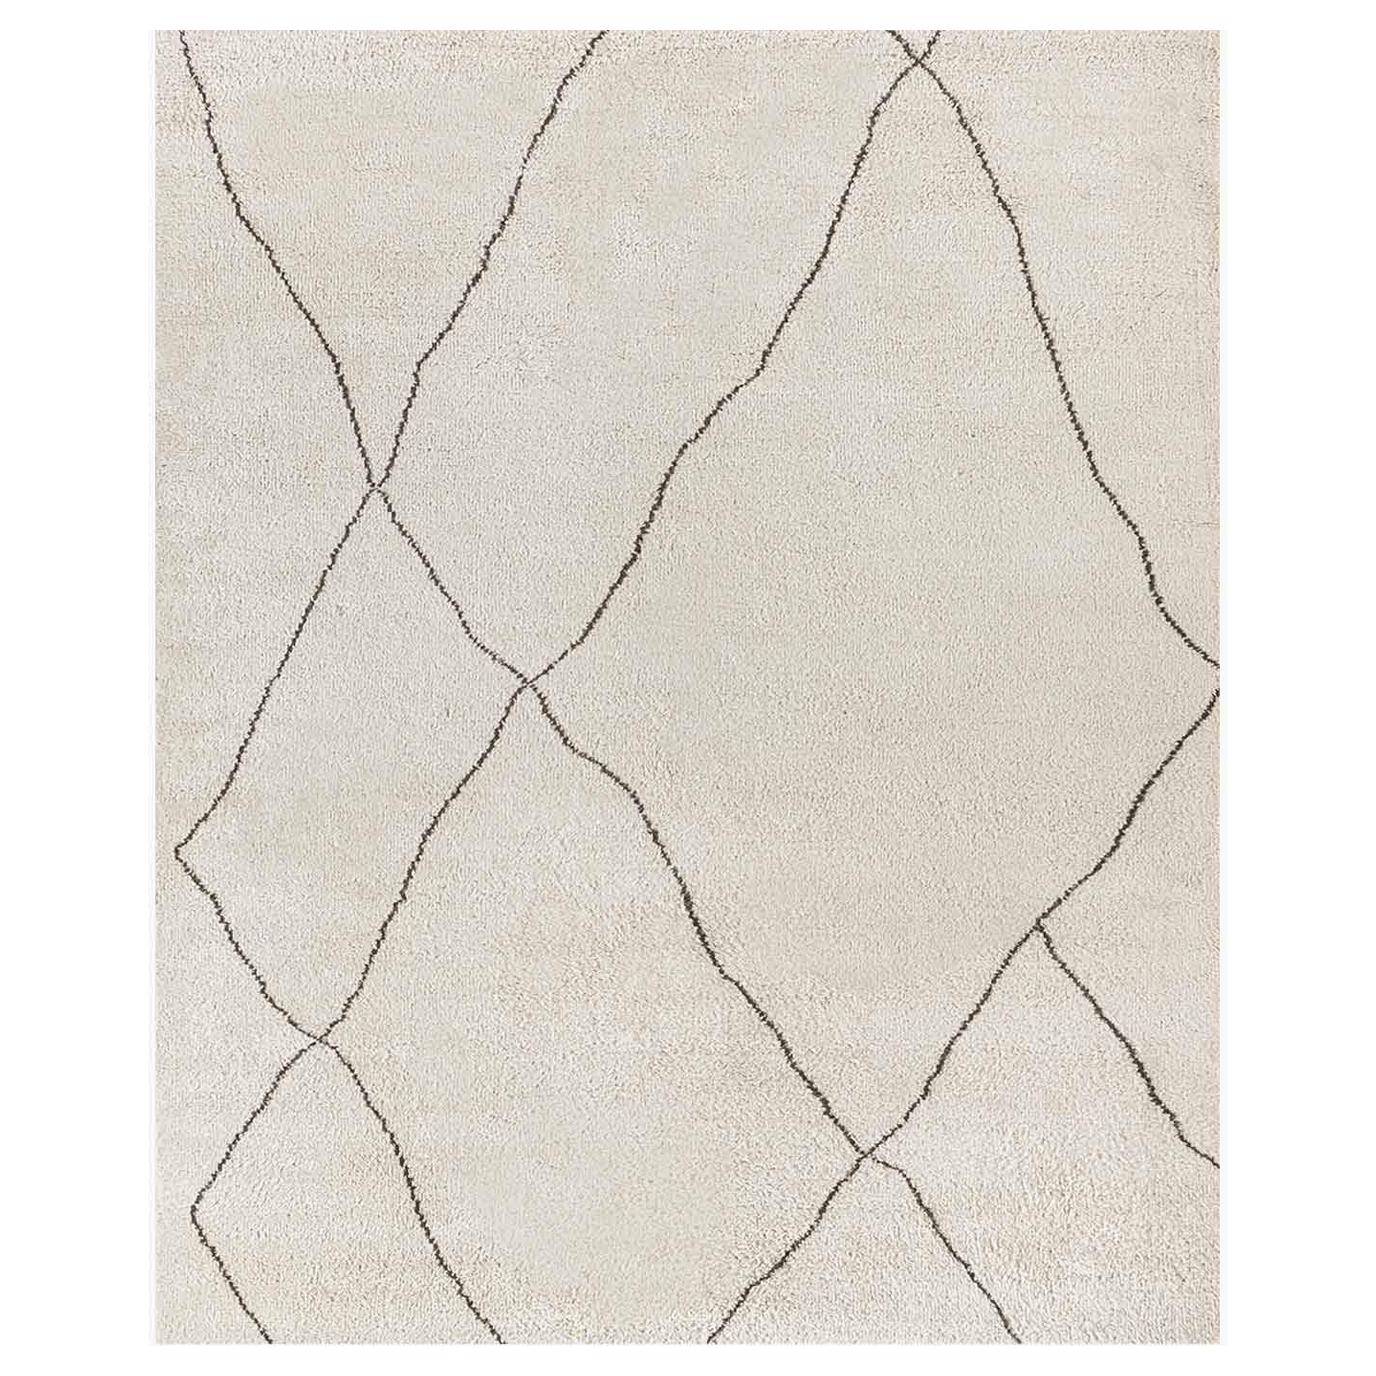 For Sale: Beige (Bisque/Cafe) Ben Soleimani Iona Rug– Moroccan Hand-knotted Wool Bisque/Cafe 12'x15'